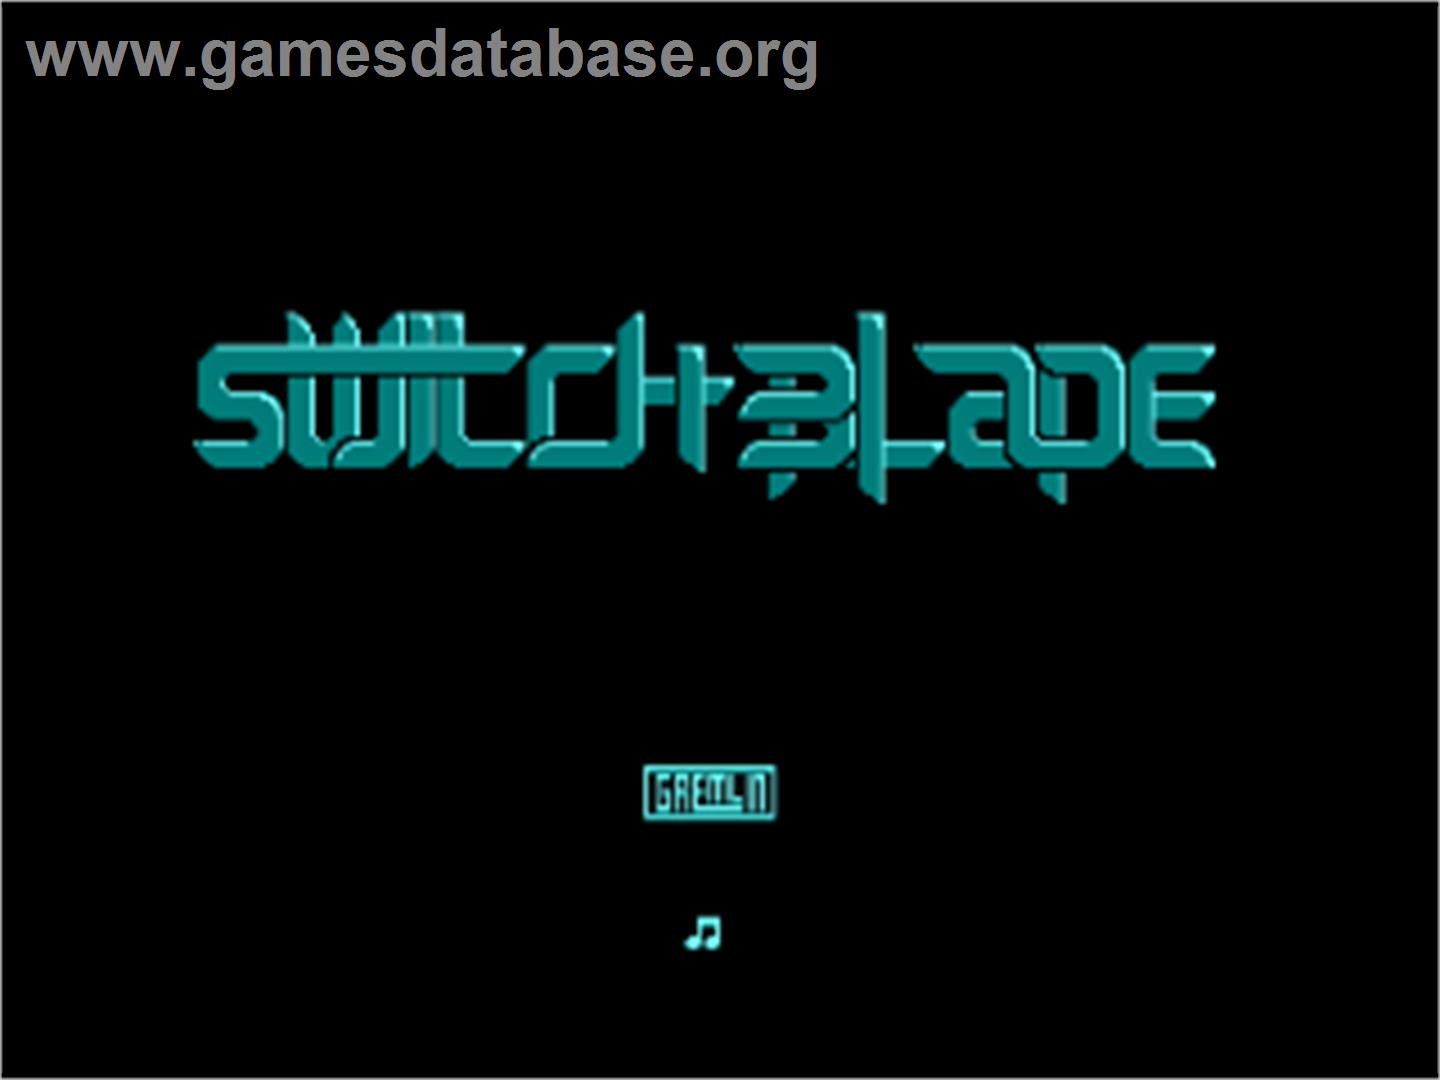 Switchblade - Amstrad CPC - Artwork - Title Screen